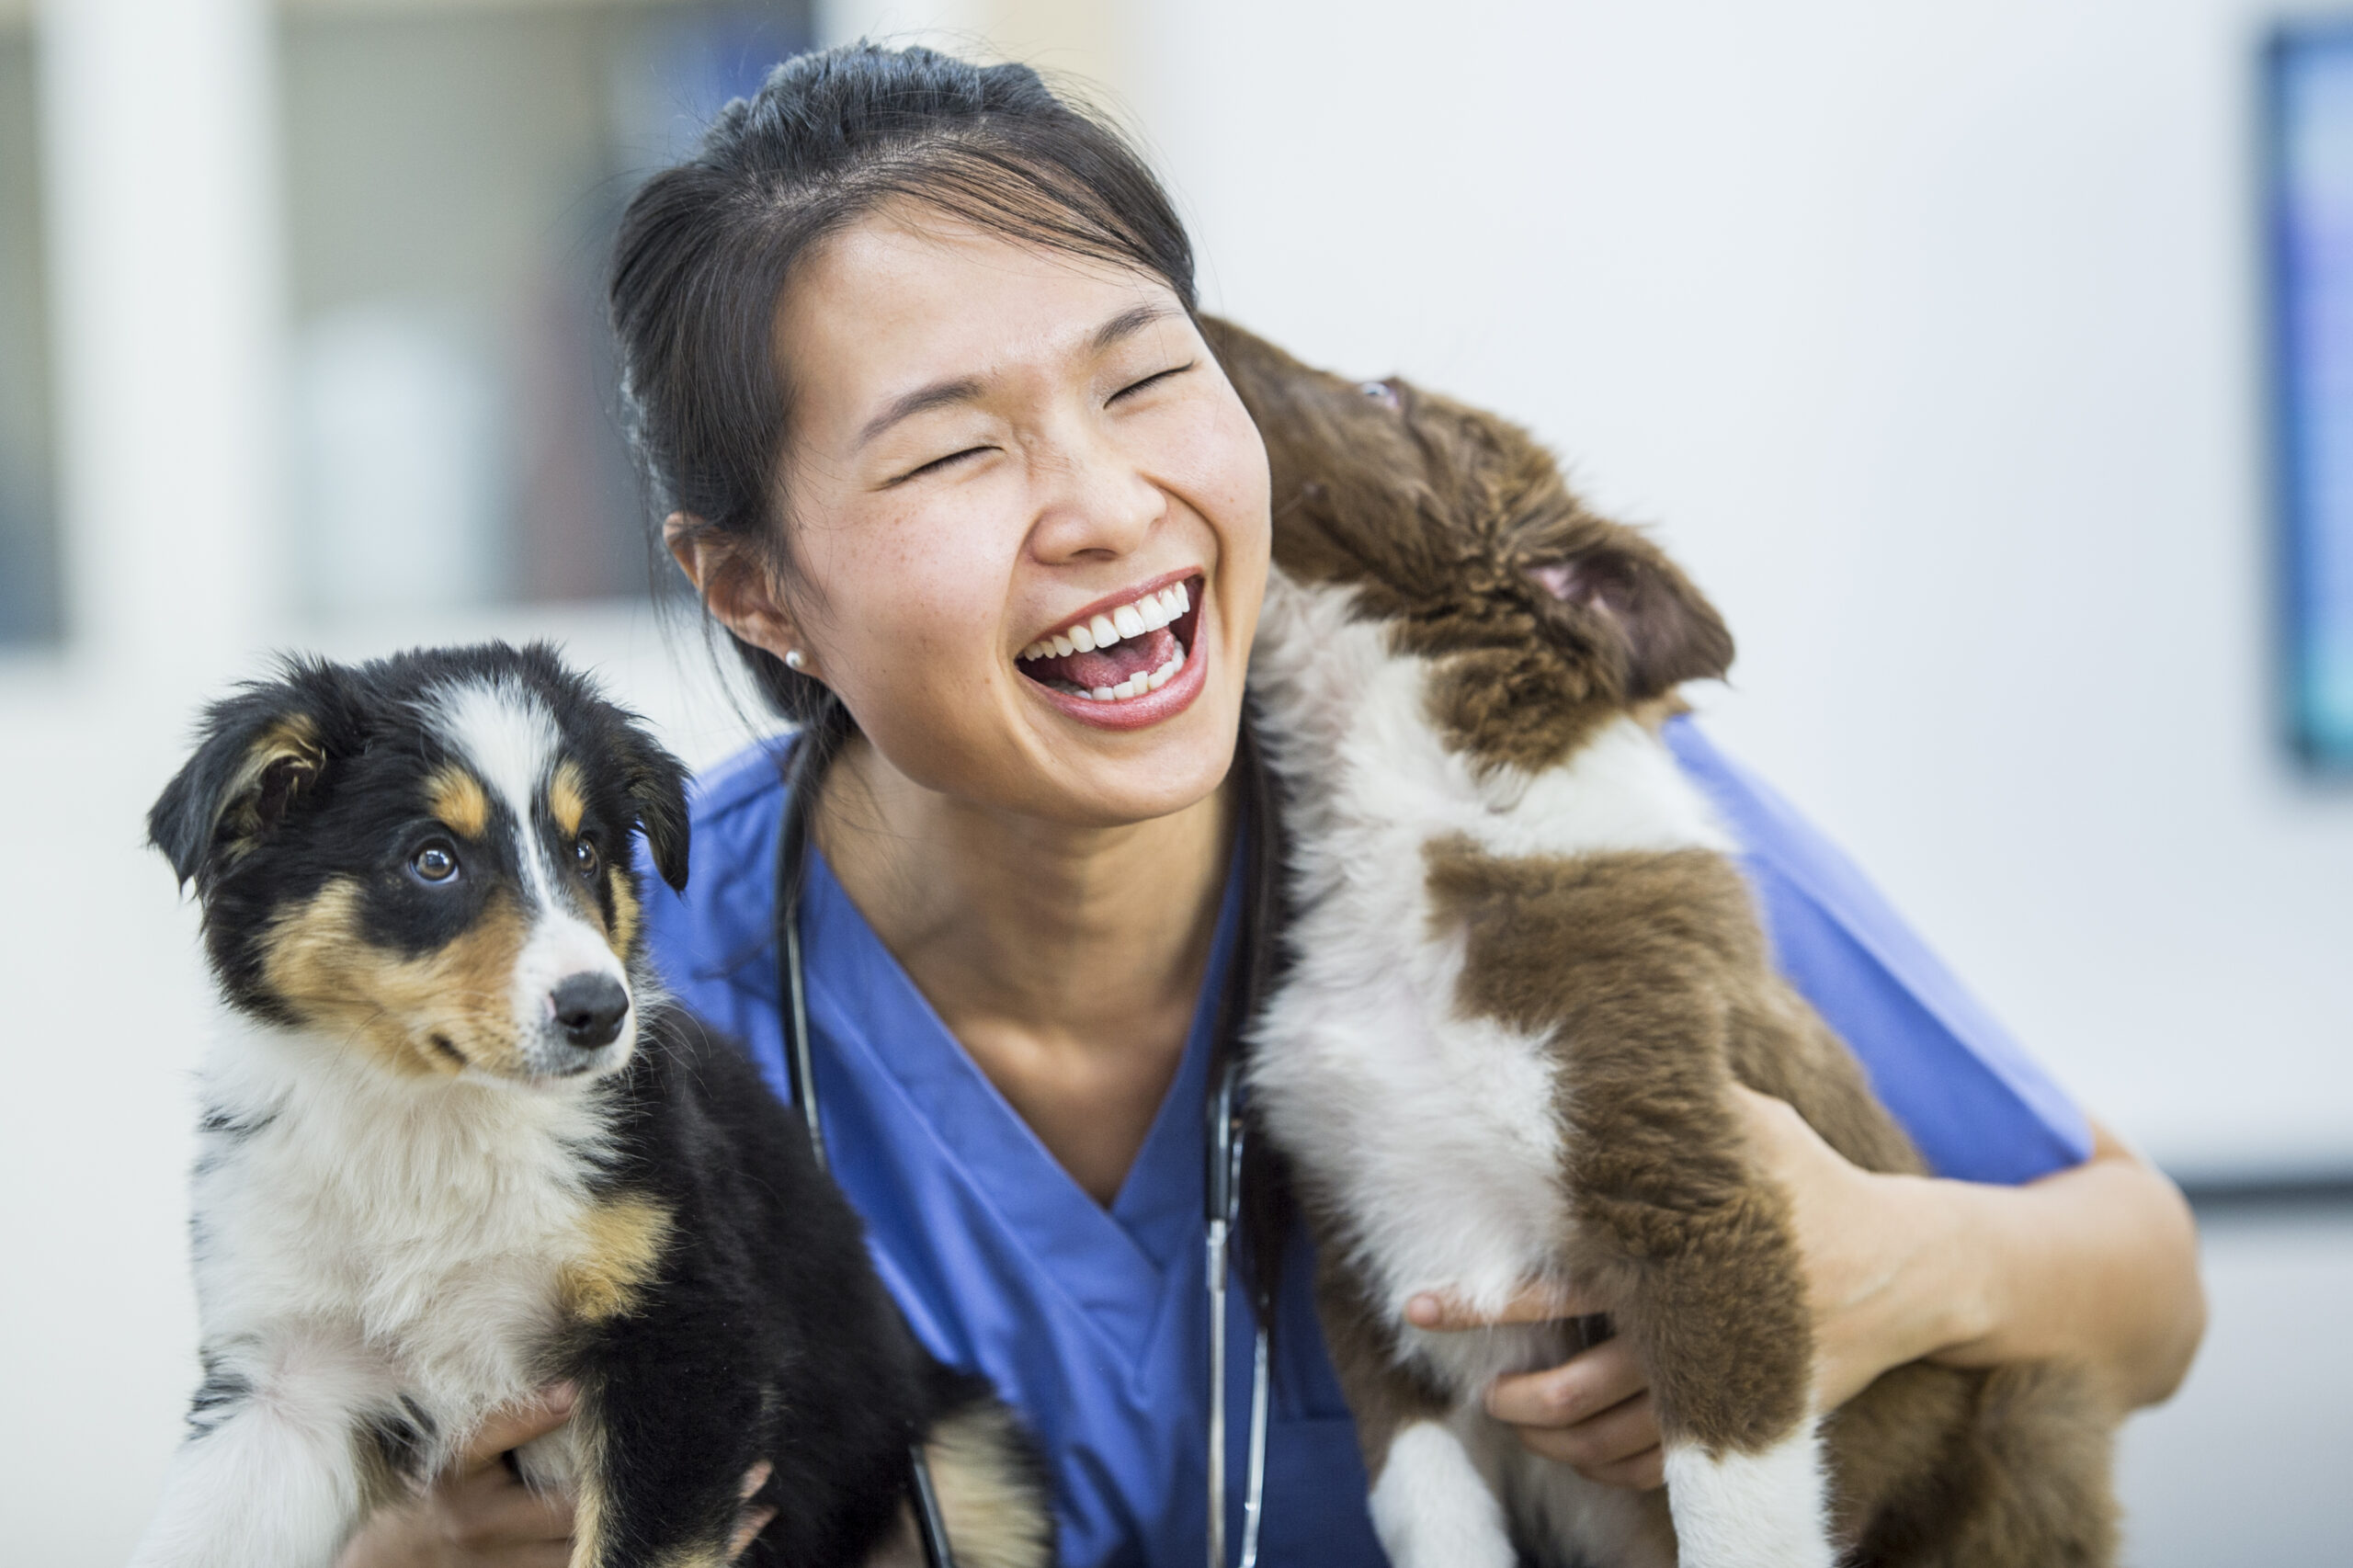 Ways to Appreciate Veterinary Technicians Now and Year-Round